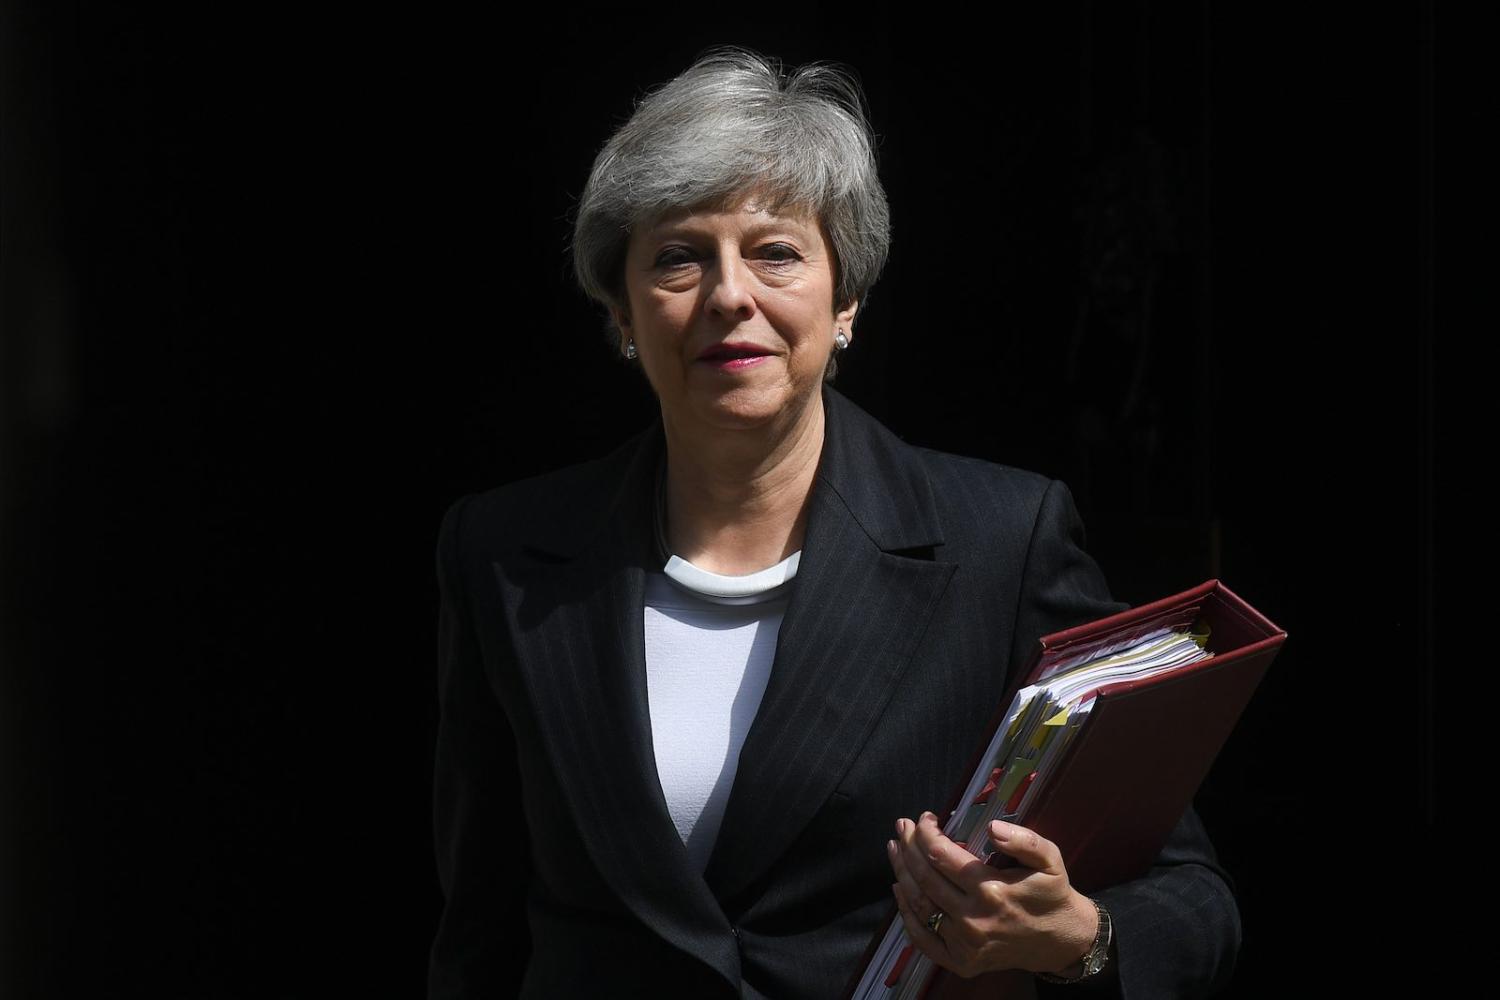 Theresa May’s strategy was always to deny there was any alternative to her deal (Photo: Daniel Leal-Olivas via Getty)